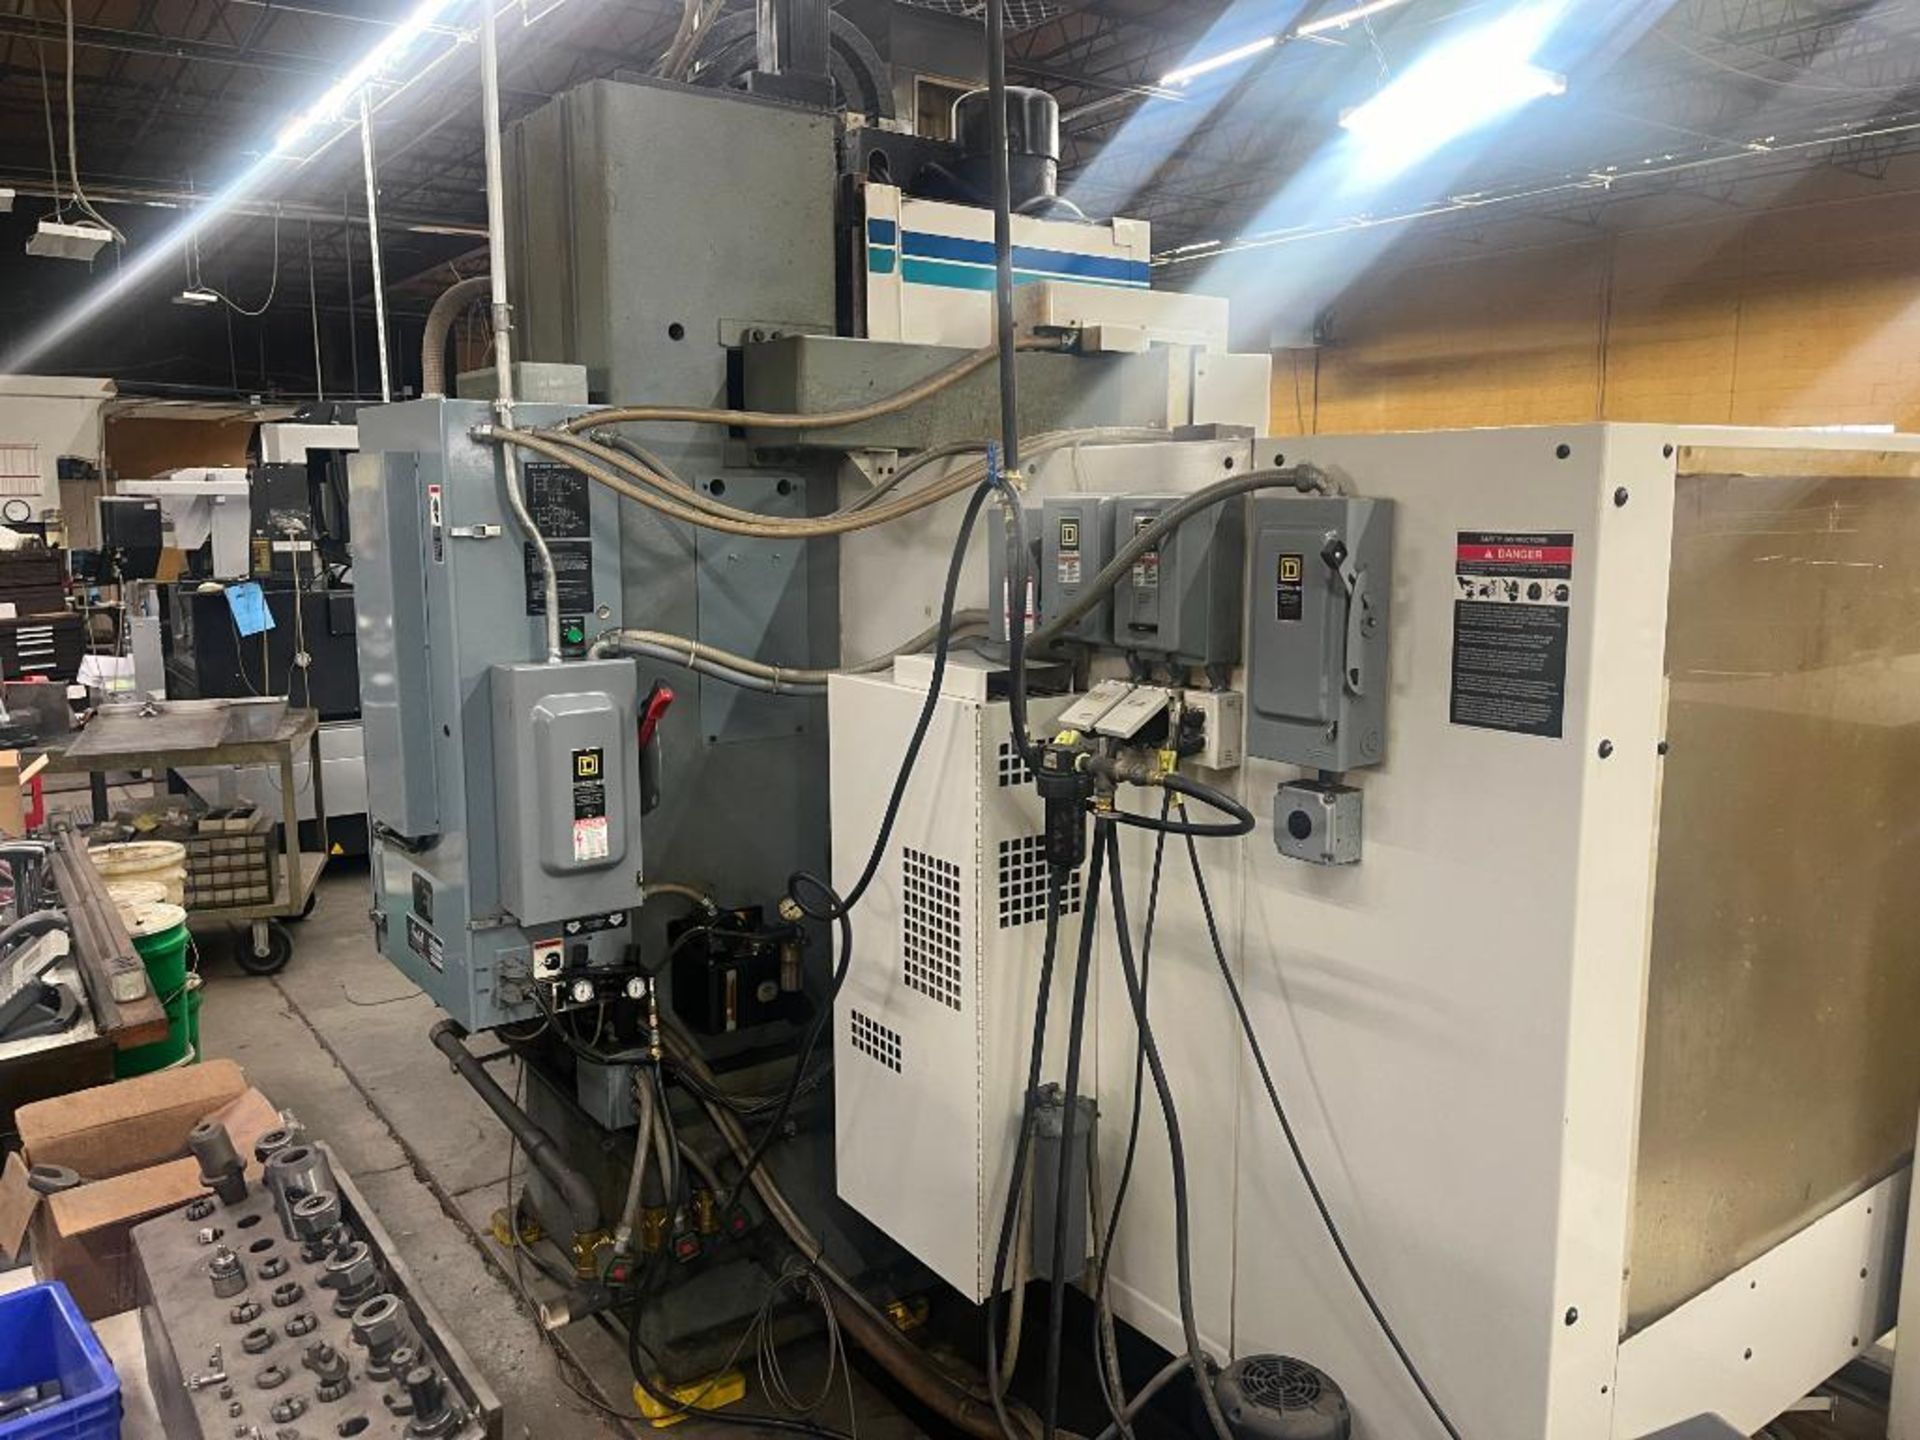 Fadal CNC Vertical Machining Center Model Model 907-1 VMC 6030HT, S/N 9704645 (1997) with Fadal CNC8 - Image 16 of 33